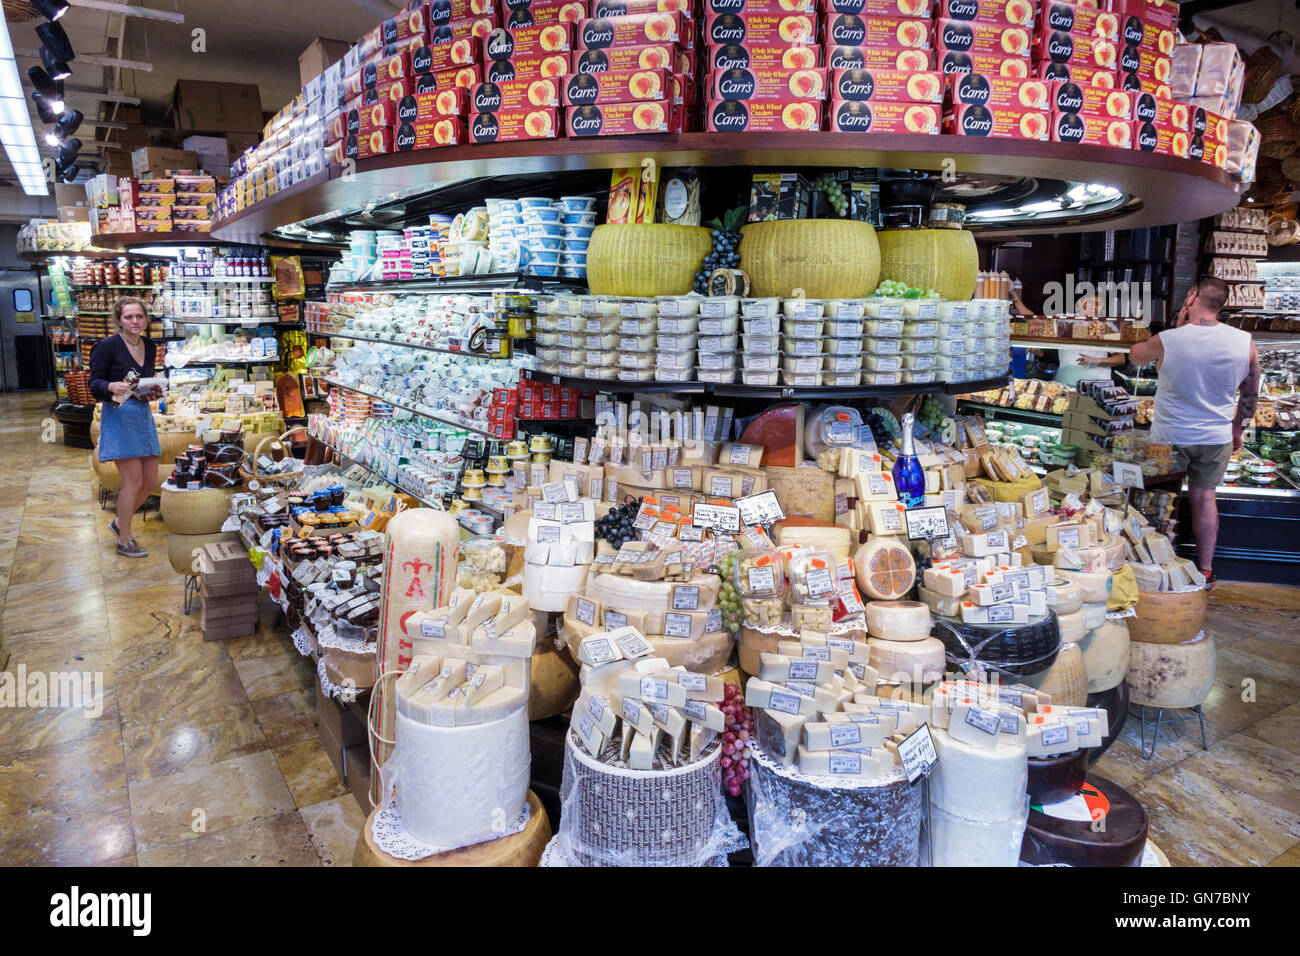 New York City,NY NYC Manhattan,Chelsea,Westside Market NYC,food market,gourmet,grocery store,cheese,cheese wheel,domestic,imported,adult adults,woman Stock Photo